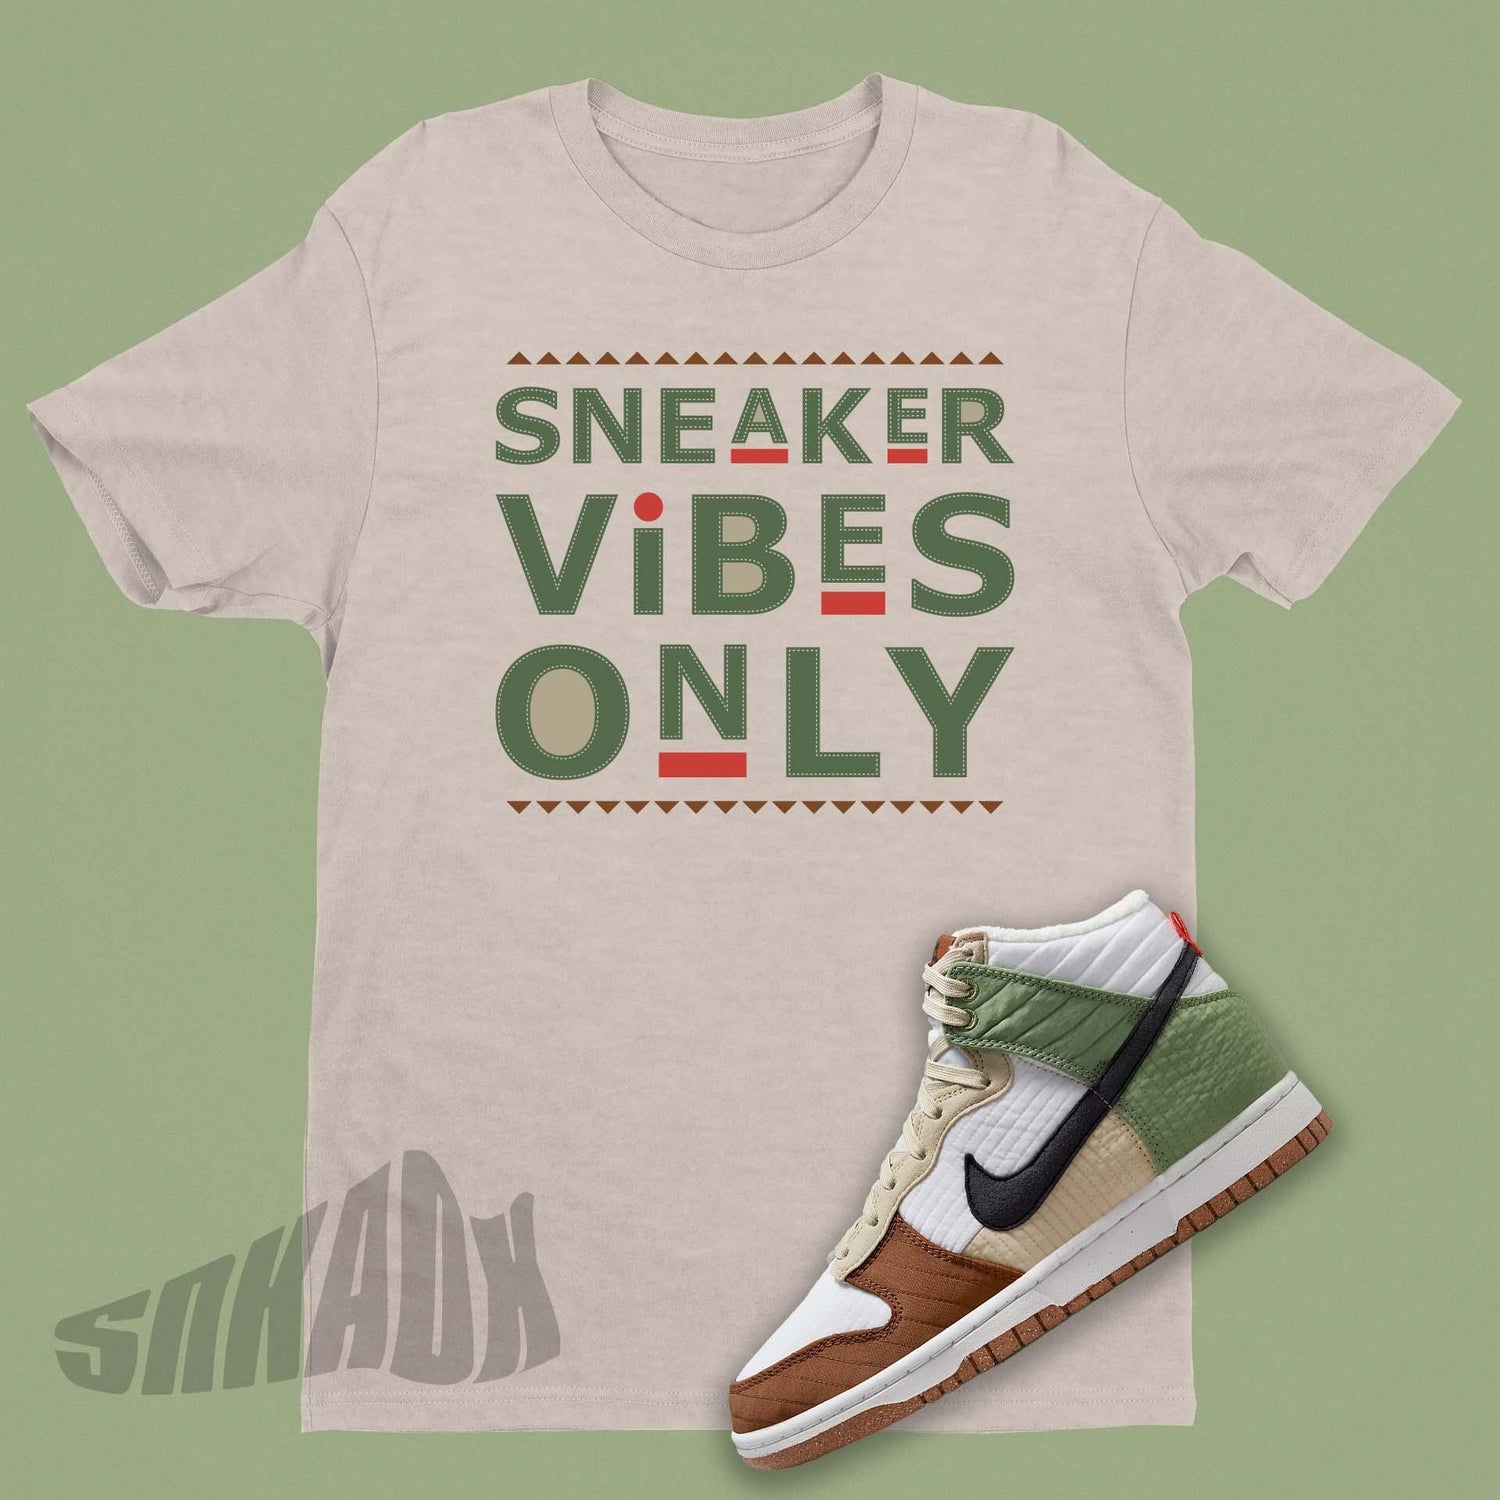 Sneaker Vibes Only in Green on Women's Tan Shirt to match Nike Dunk Toasty